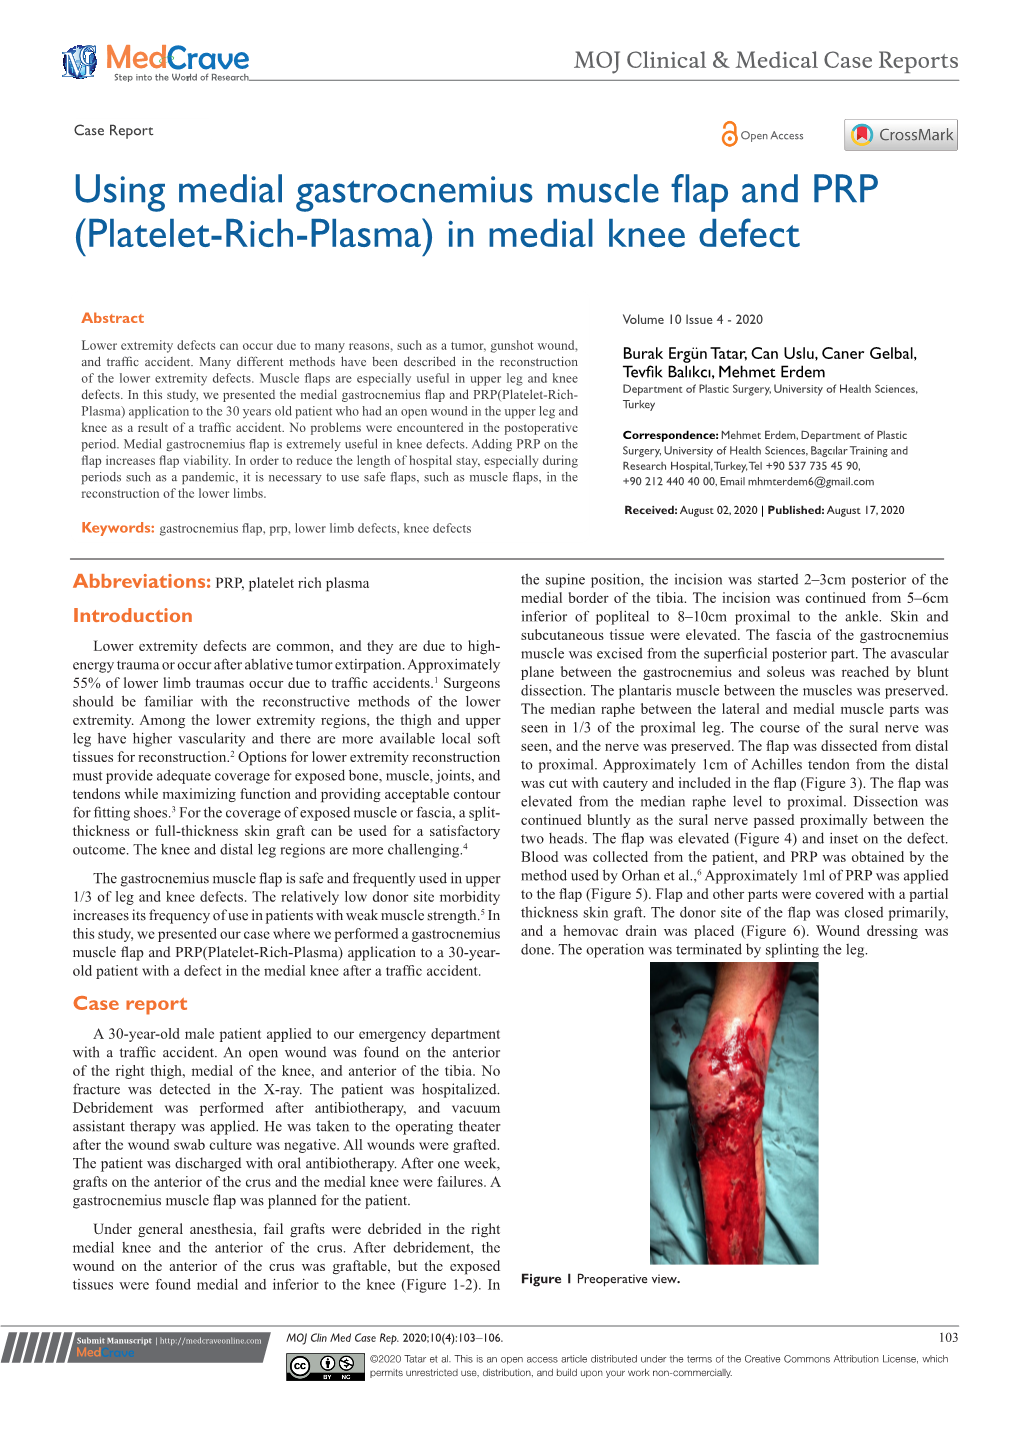 Using Medial Gastrocnemius Muscle Flap and PRP (Platelet-Rich-Plasma) in Medial Knee Defect